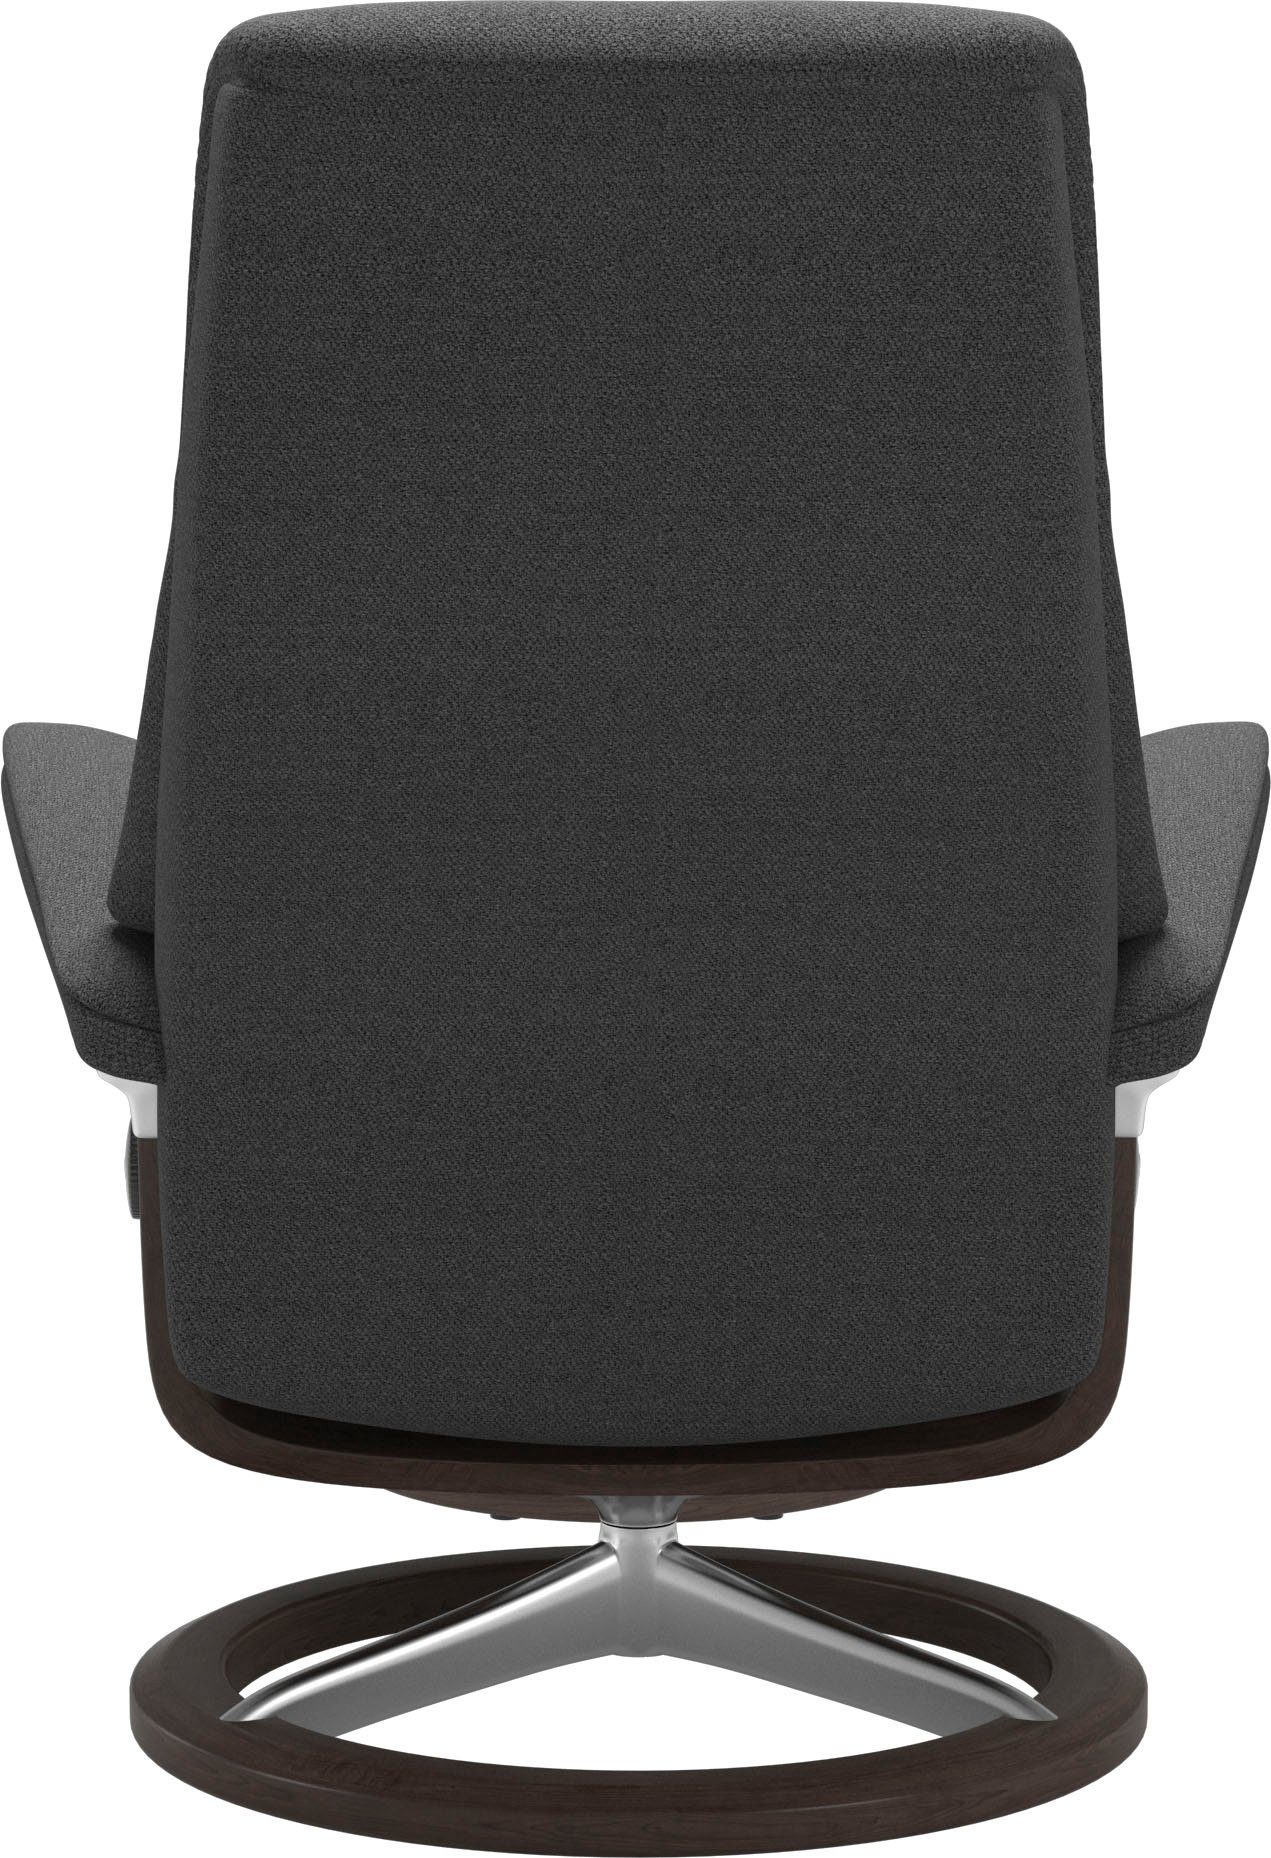 Größe View, mit Relaxsessel Signature Wenge Base, S,Gestell Stressless®